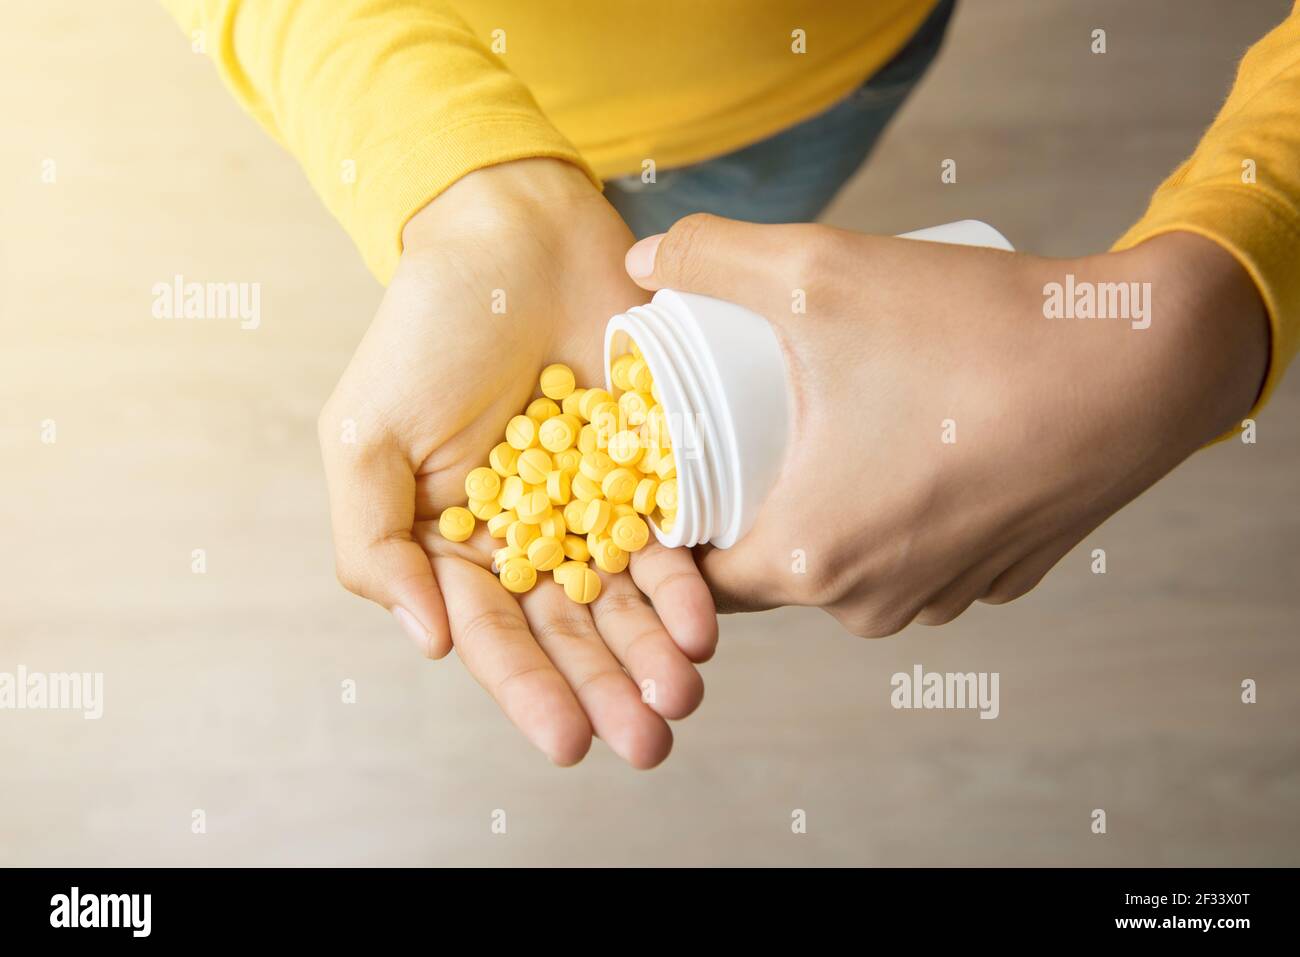 Woman pouring a lot of pills into her hand - drug addict and overdose concepts Stock Photo